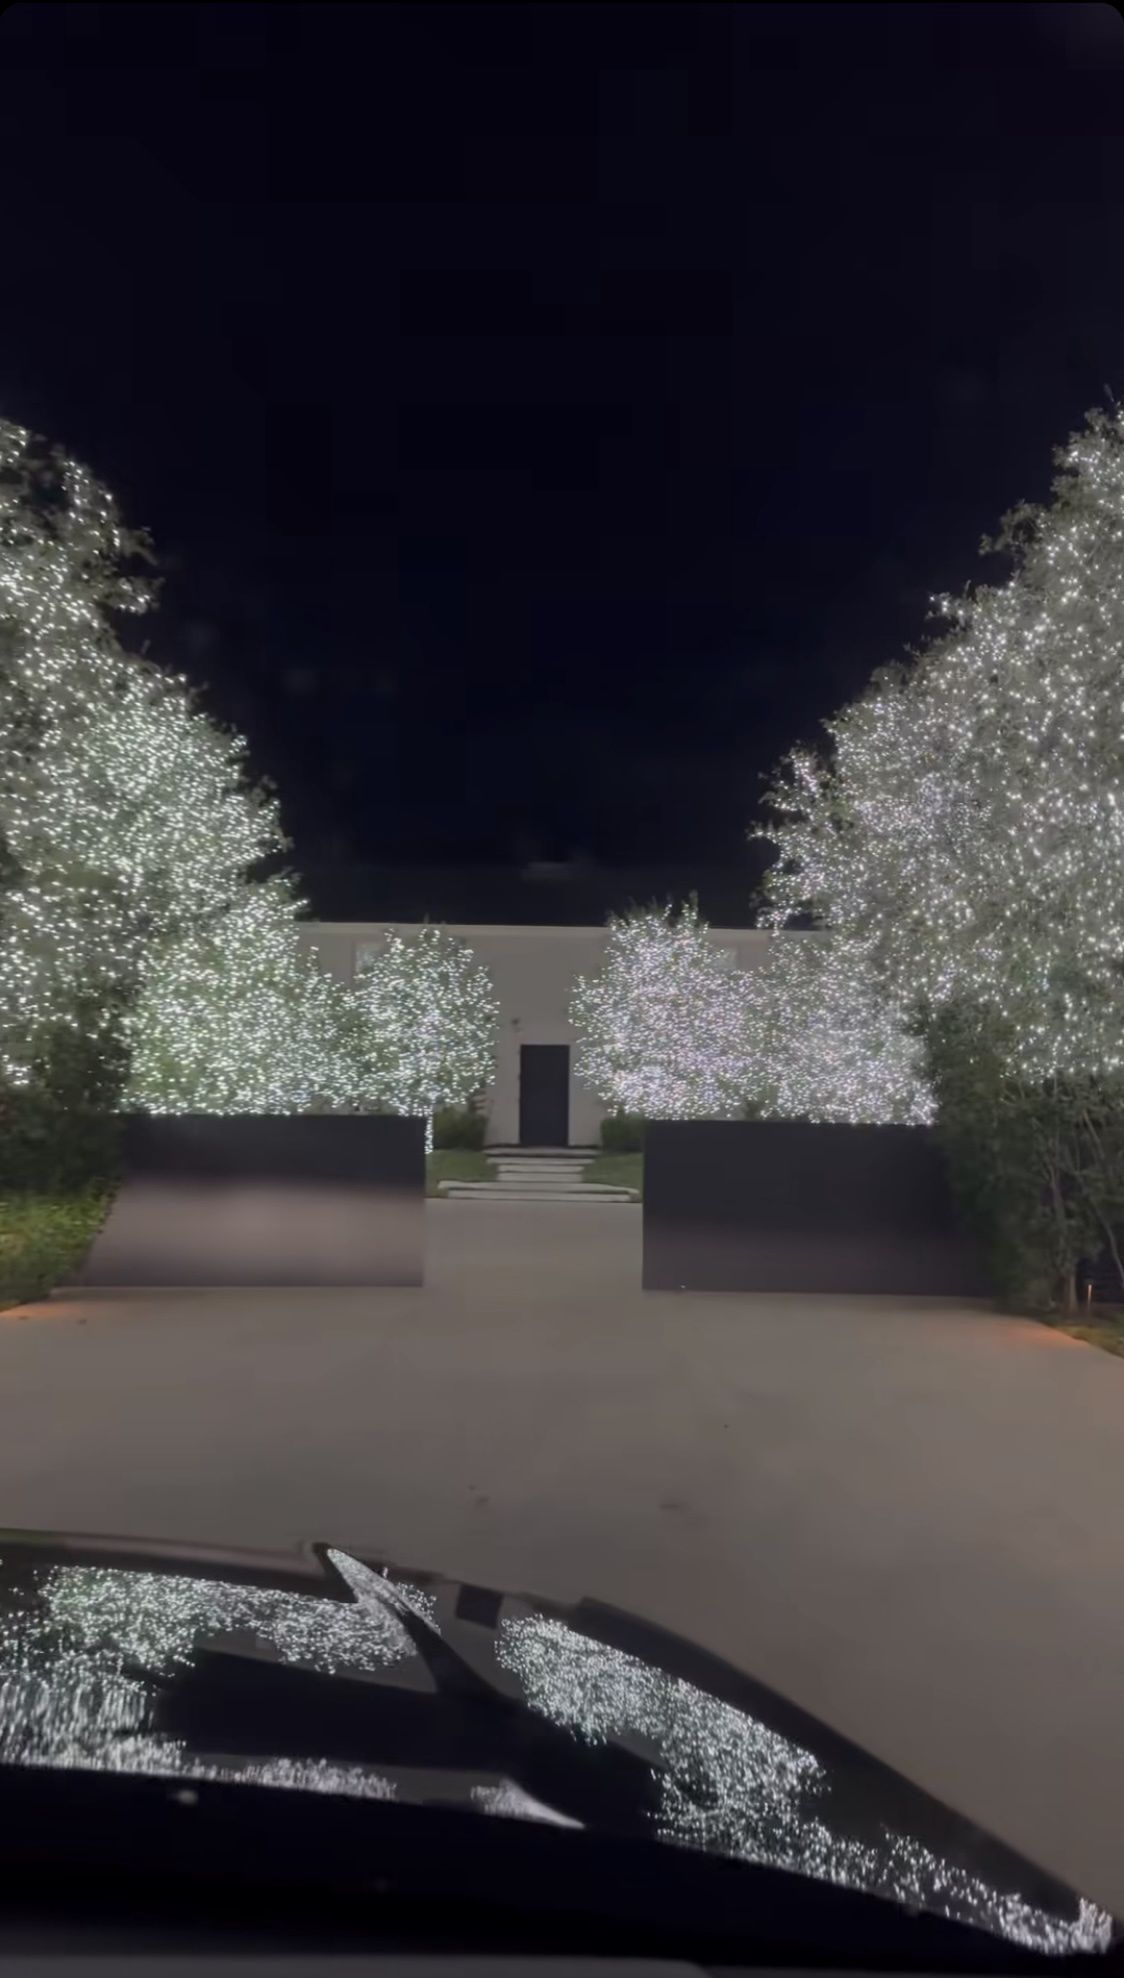 Kim Kardashian went wild and showed off her holiday decorations.